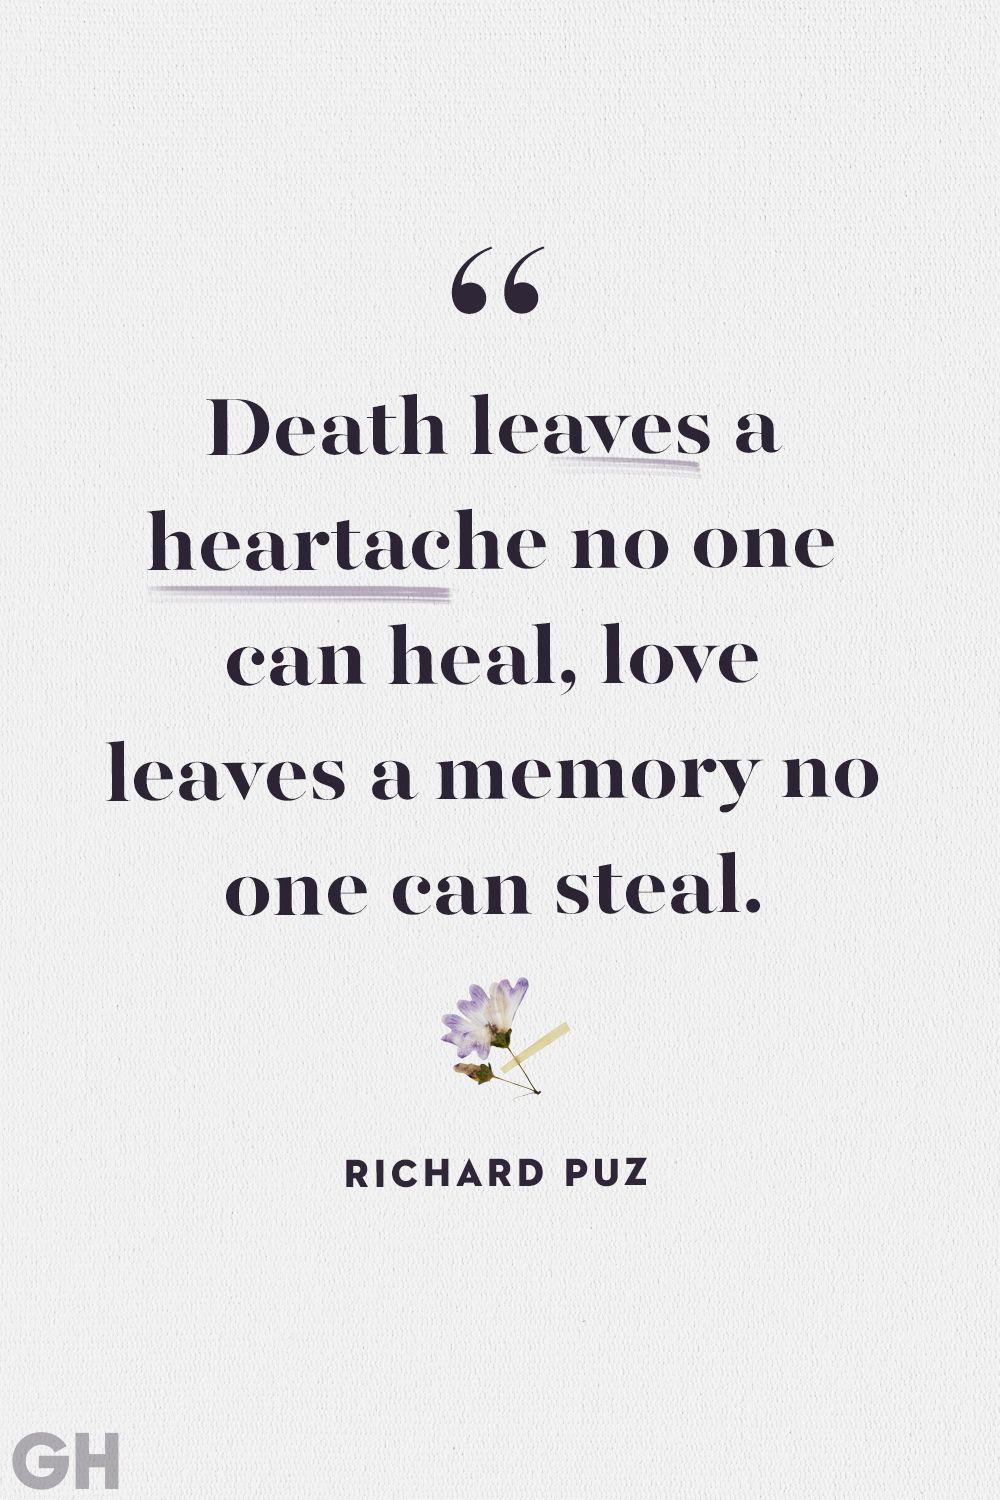 mourning the loss of a loved one quotes